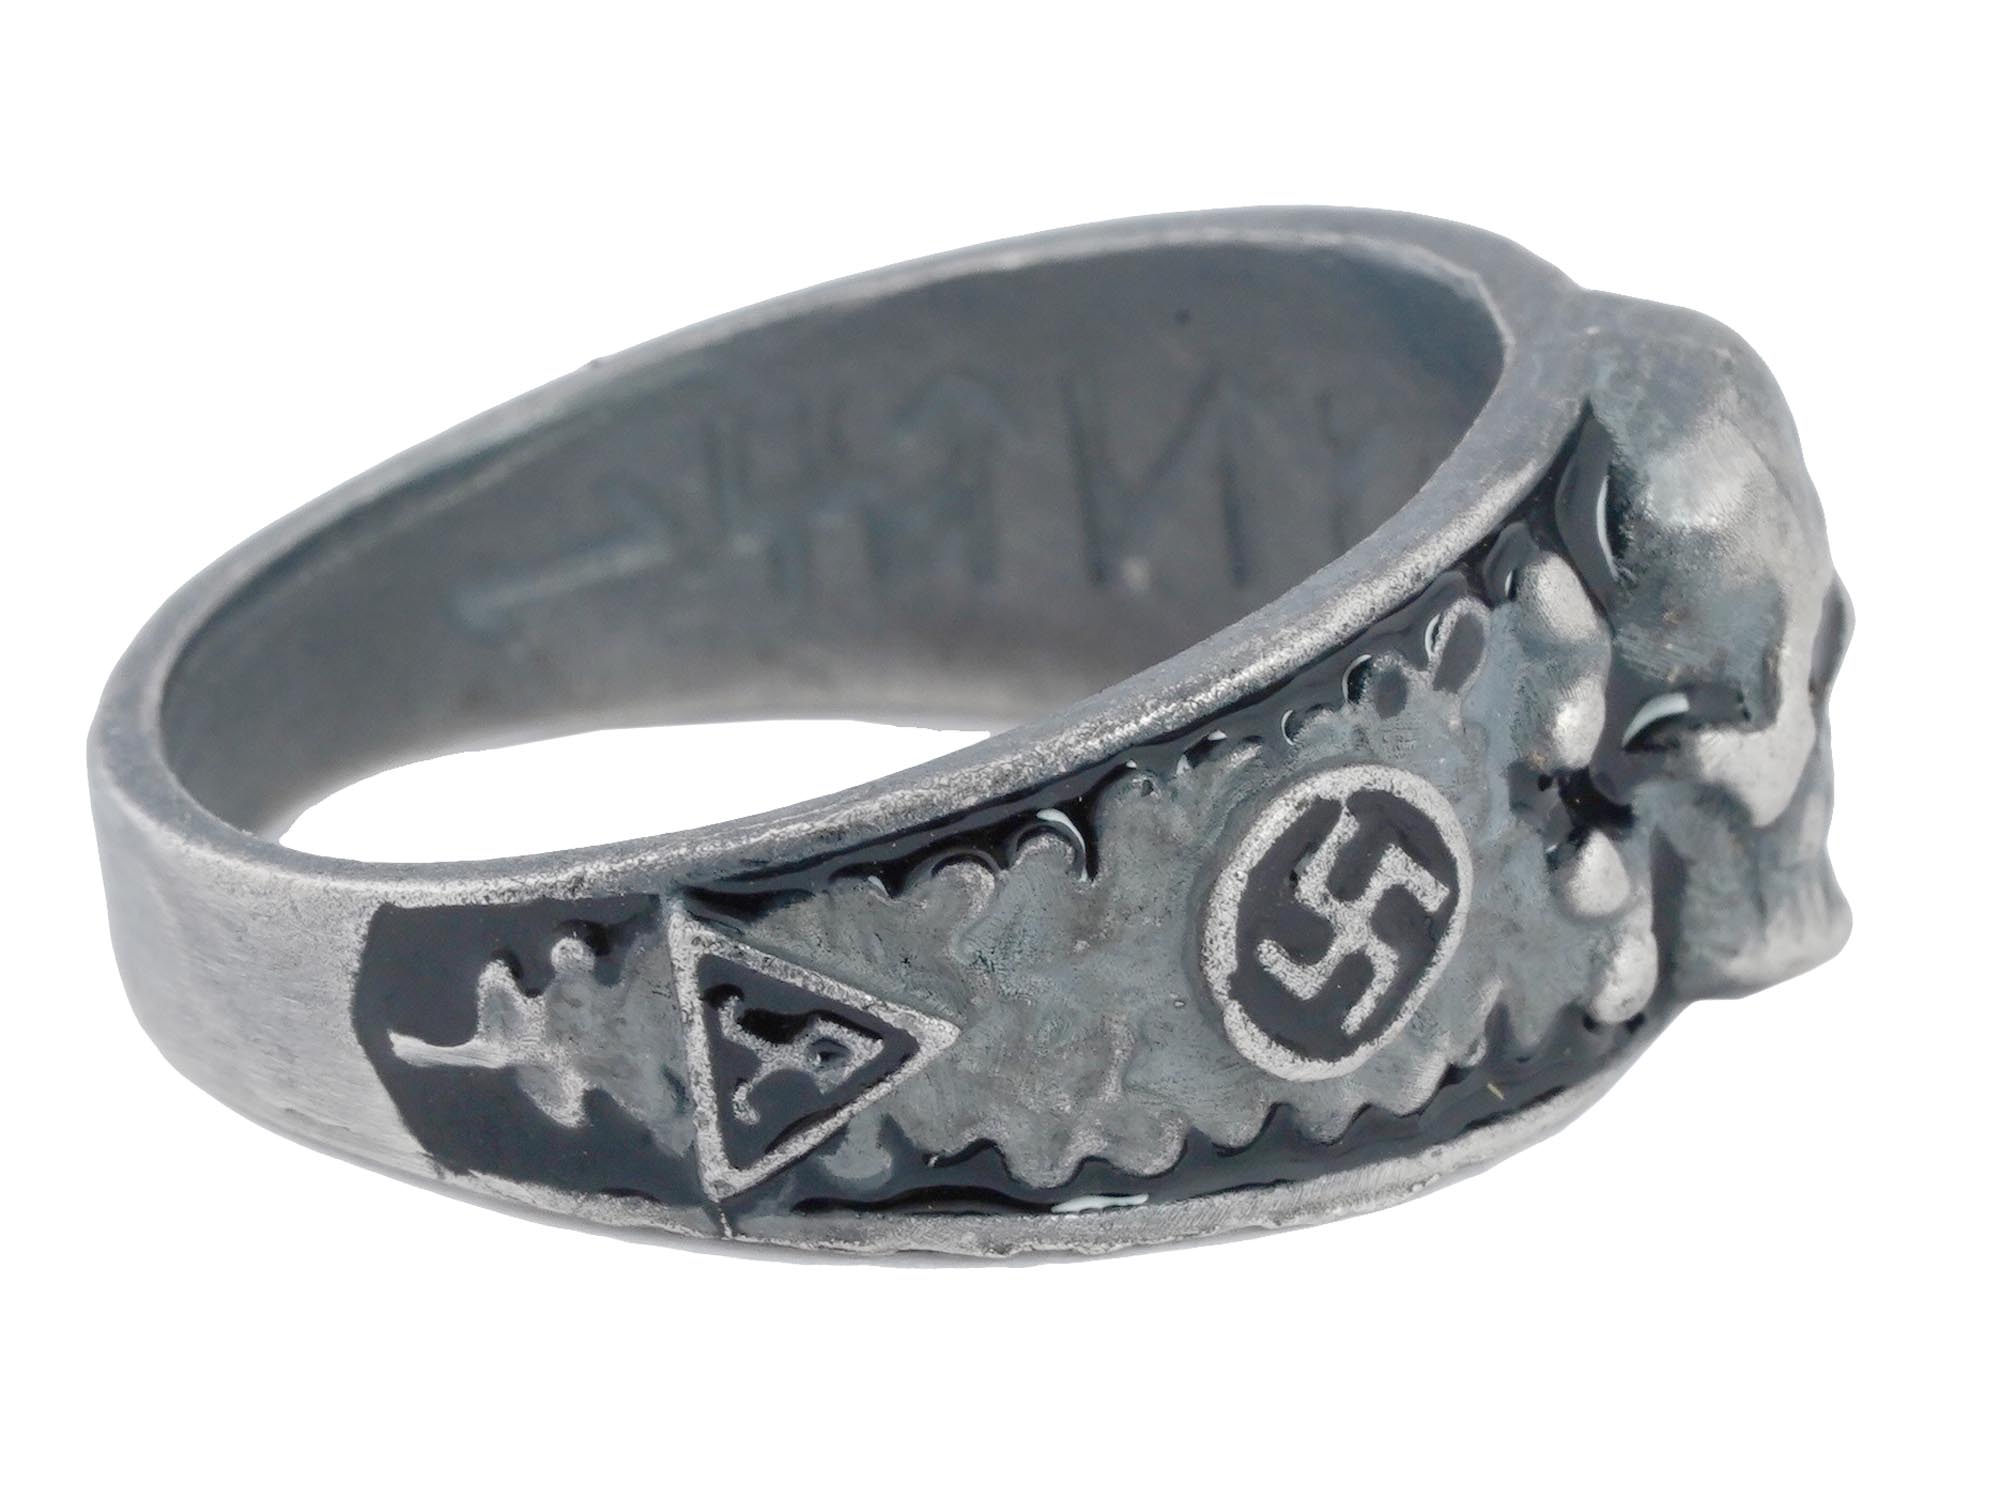 GERMAN WWII SS SECRET SOCIETY AHNENERBE SILVER RING PIC-4